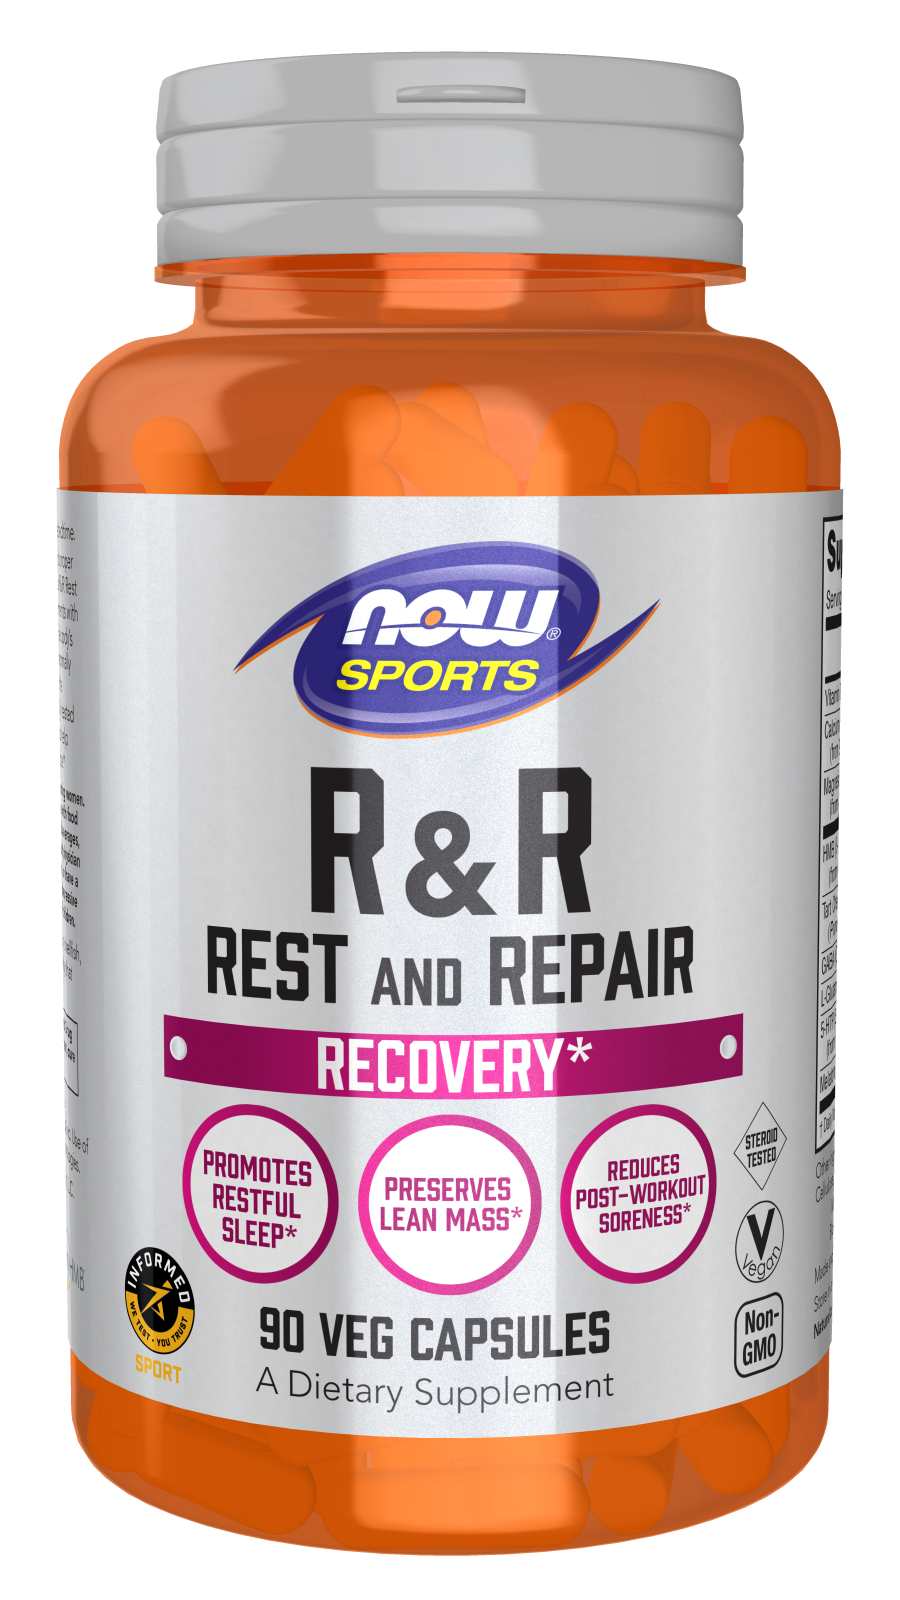 NOW Sports R&R Rest and Repair